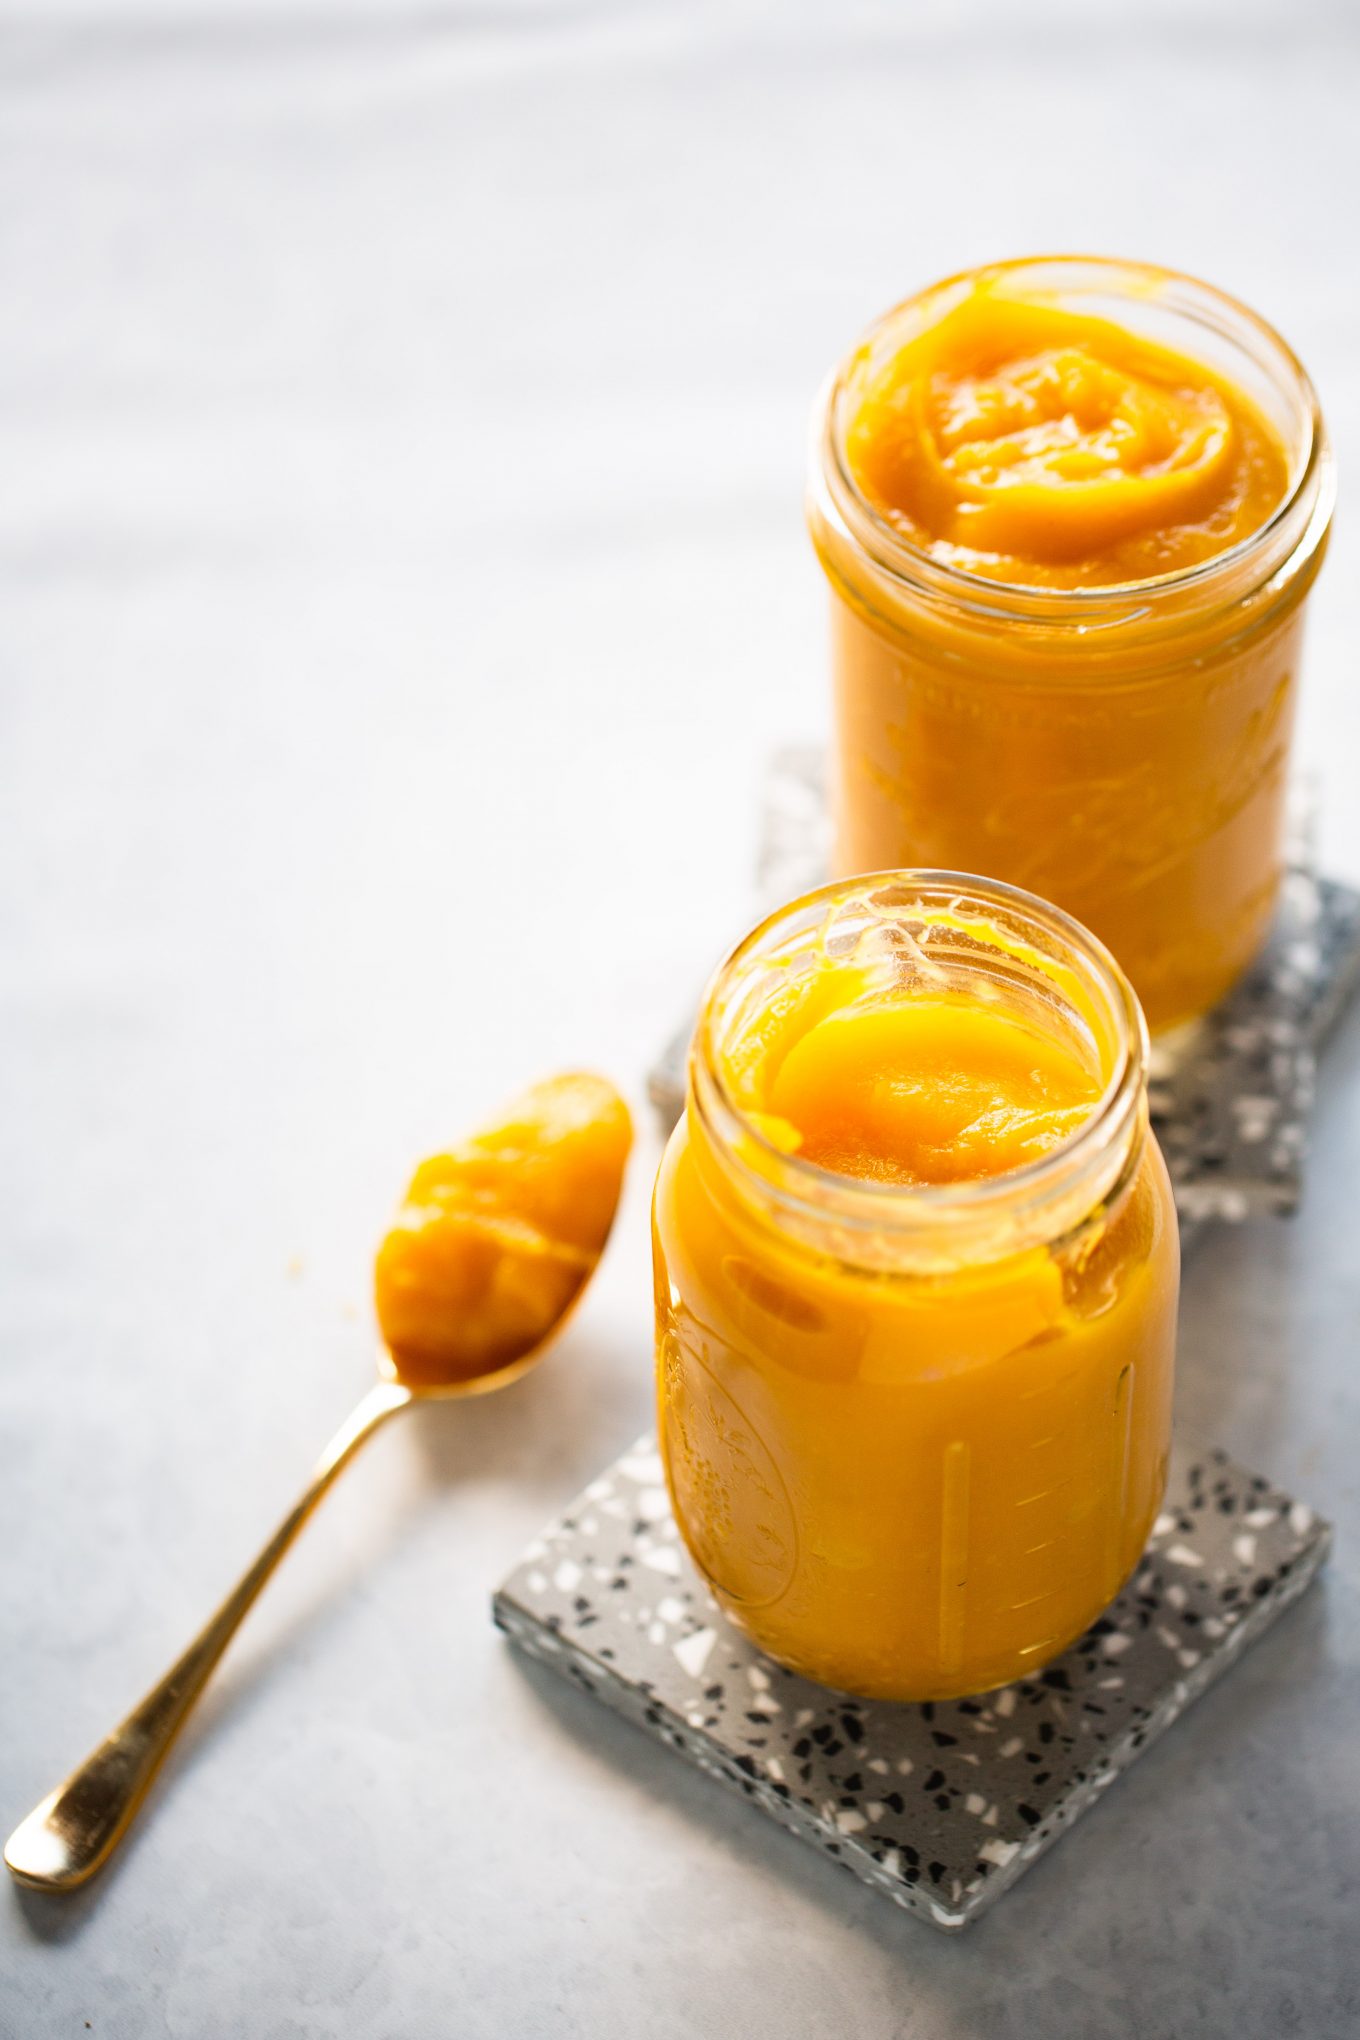 Two jars of homemade pumpkin puree sitting on a table.